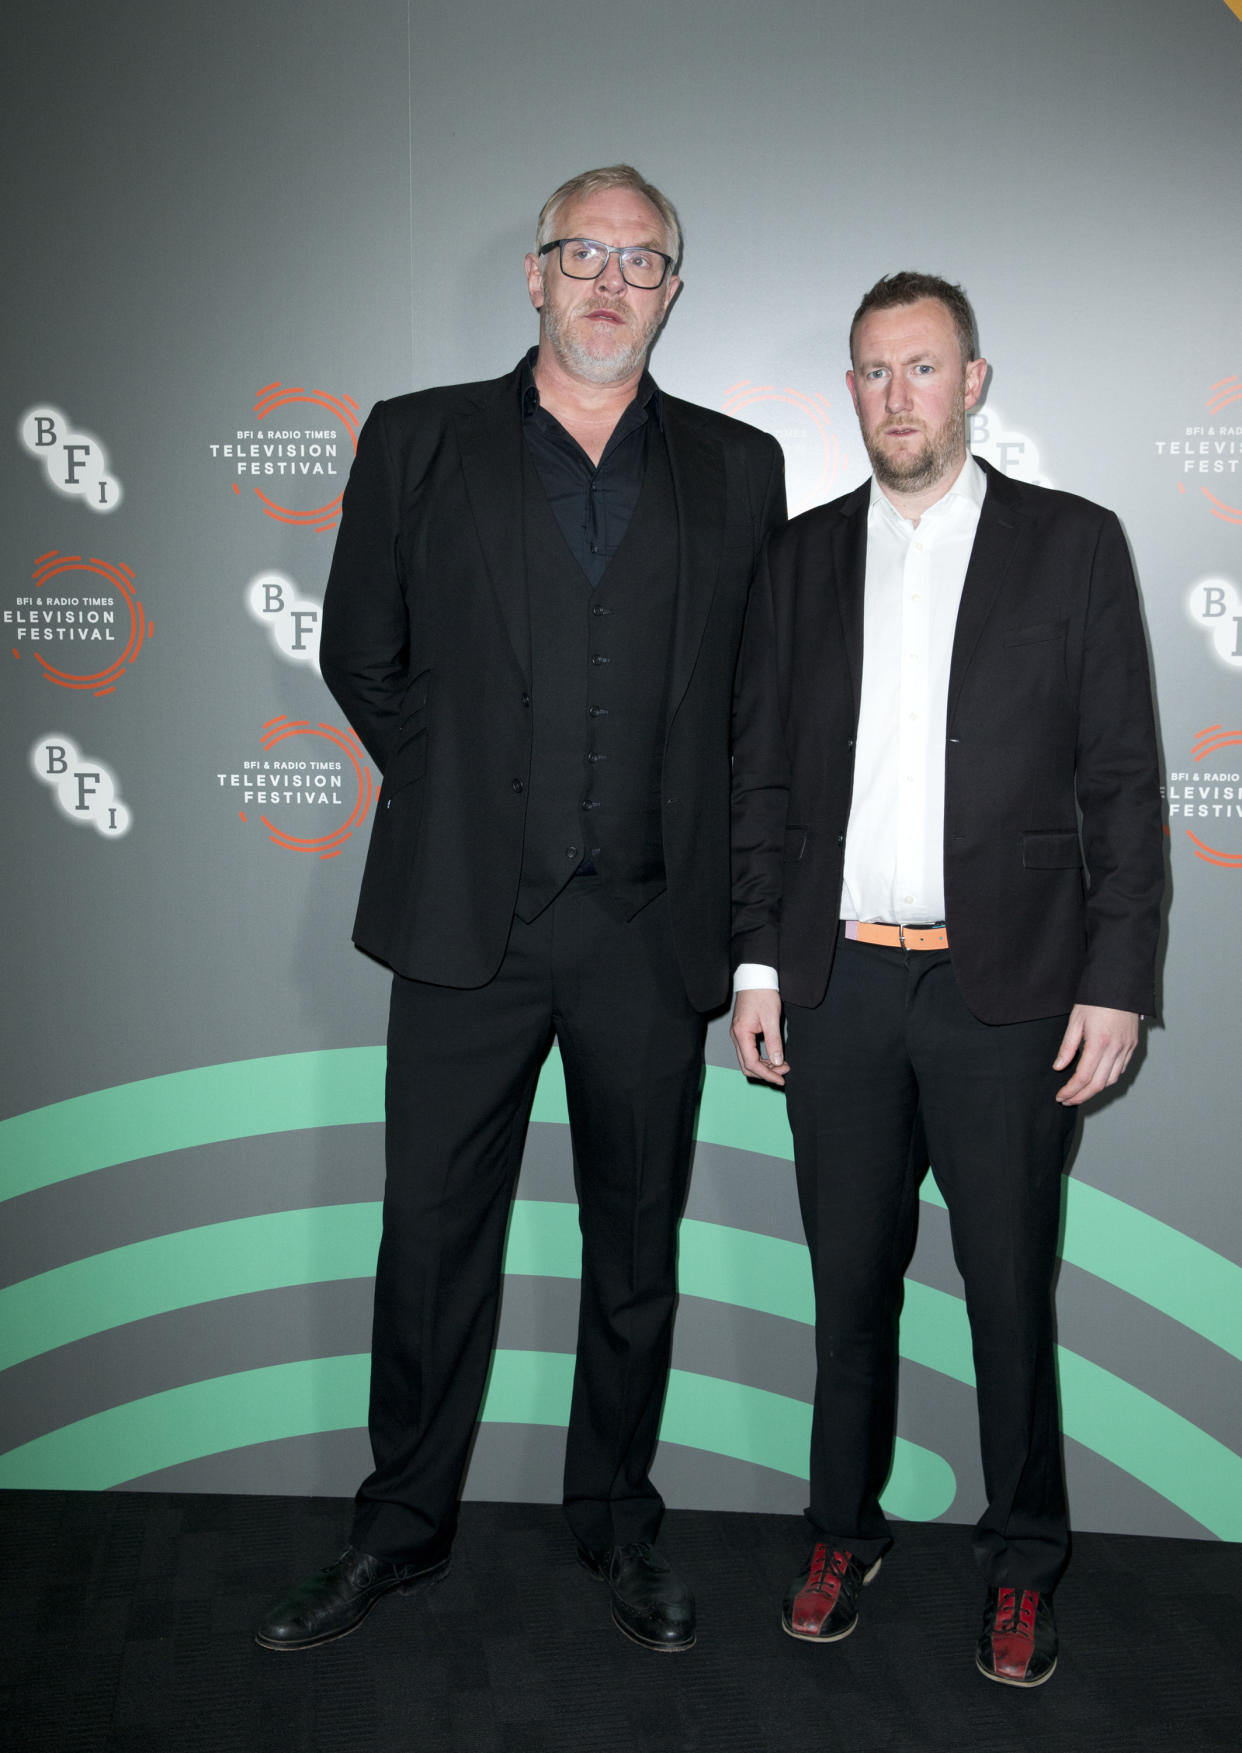 Greg Davies (left) and Alex Horne attending a photocall for 'Taskmaster' during the BFI and Radio Times Television Festival at the BFI Southbank, London.